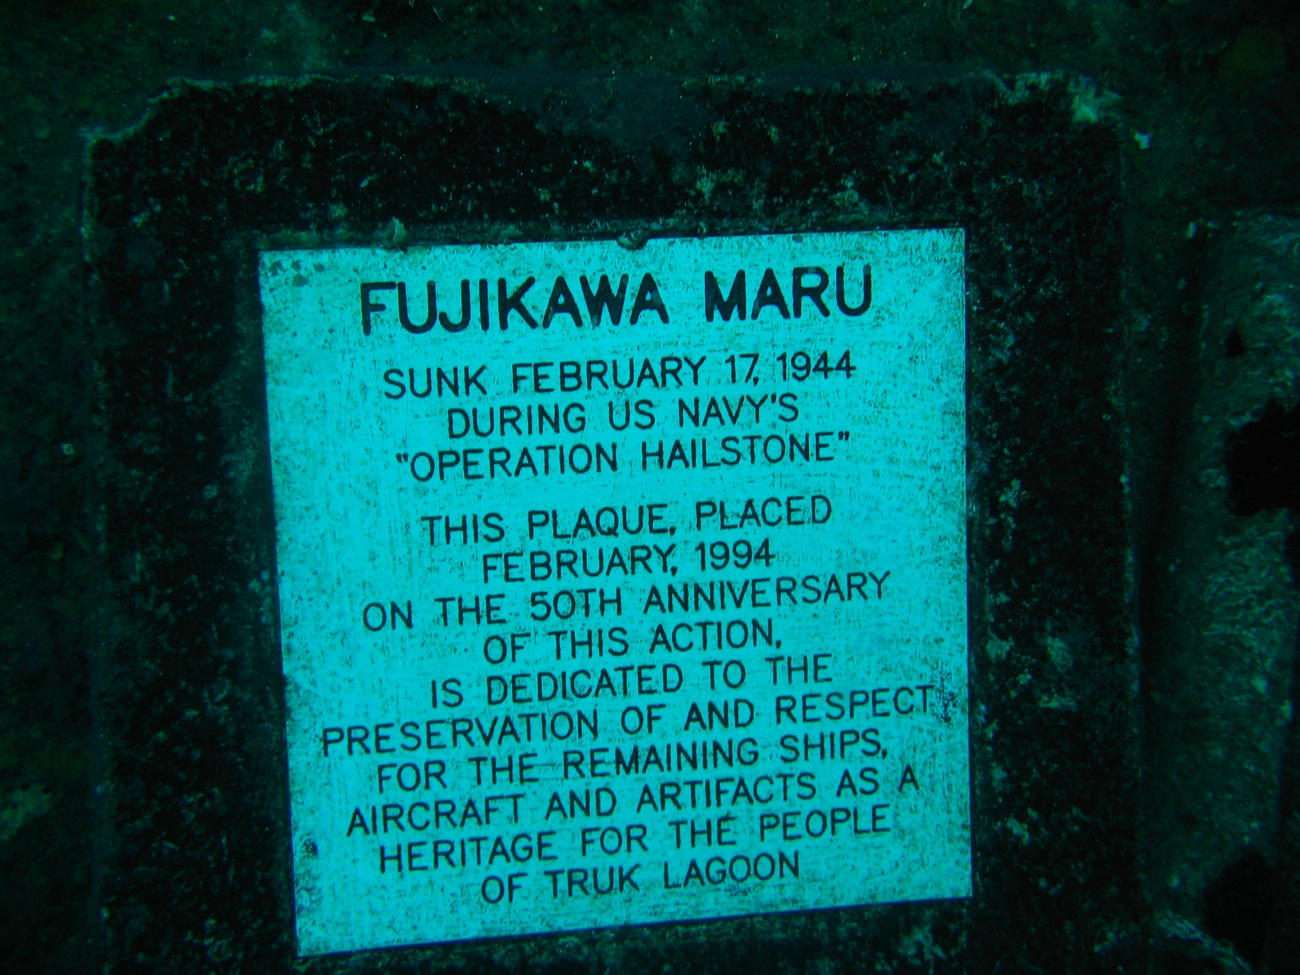 Plaque placed on the Fujikawa Maru commemorating the 50th Anniversary of thesinking of this vessel during WWII